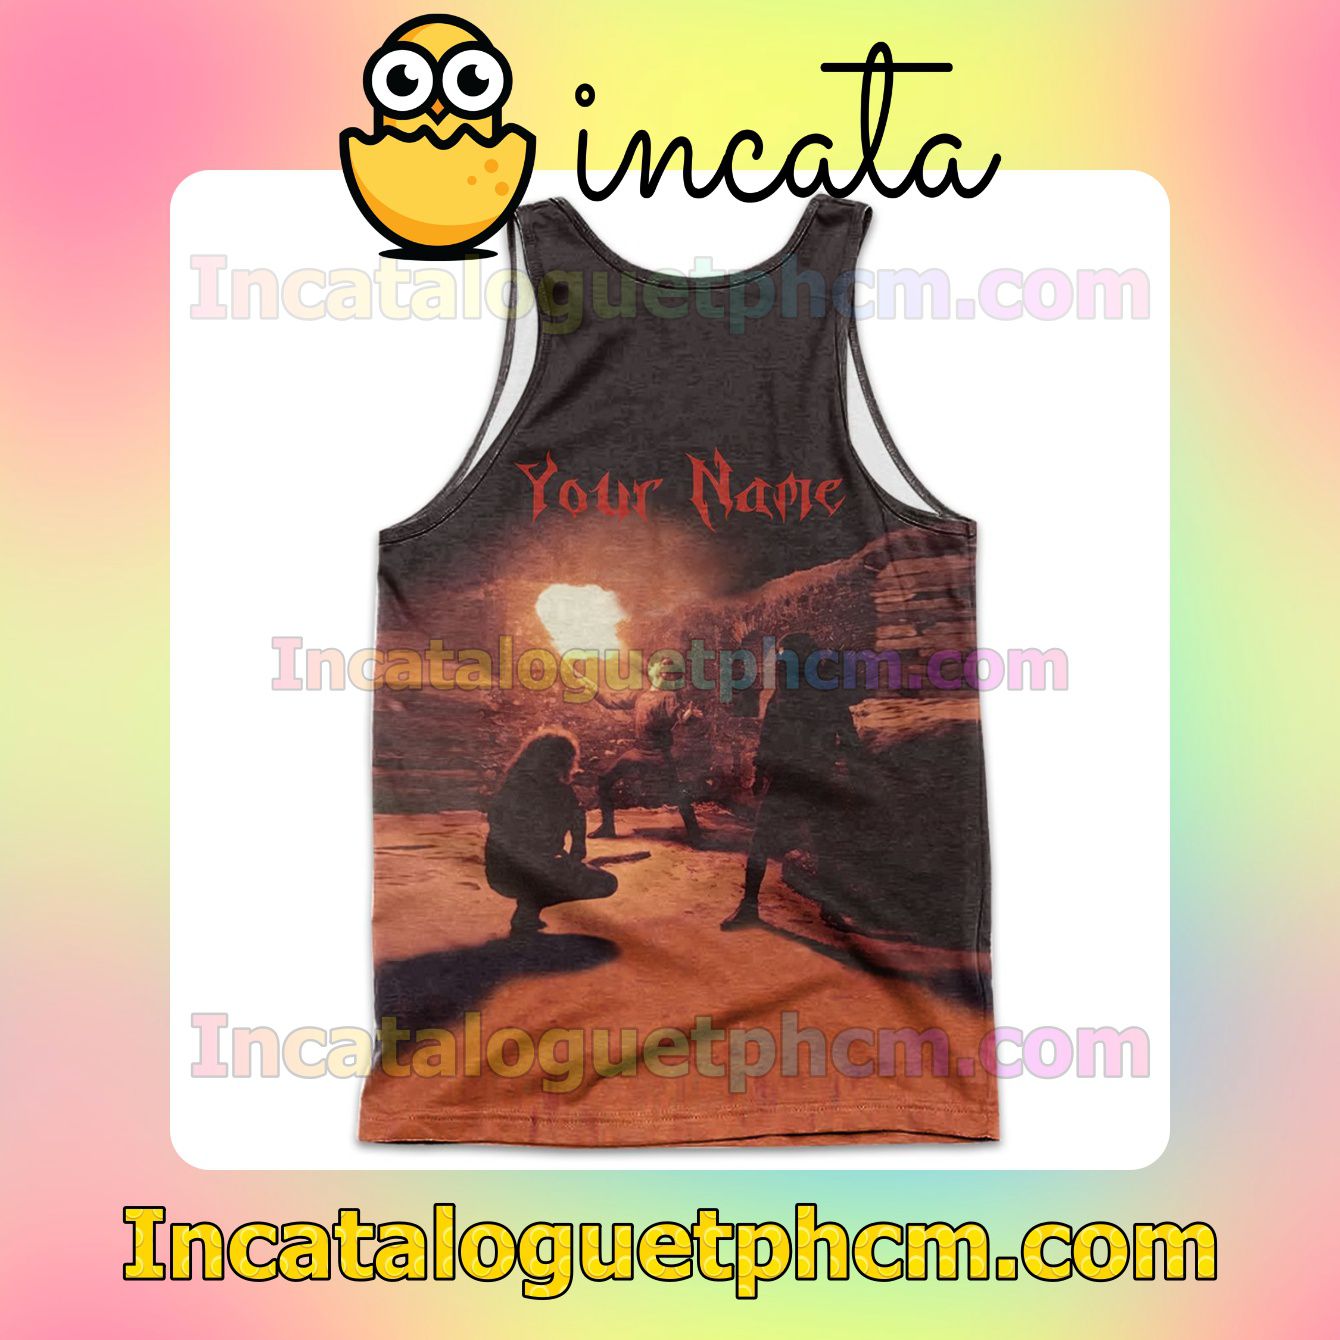 Check out Personalized Immortal Diabolical Fullmoon Mysticism Album Cover Workout Tank Top